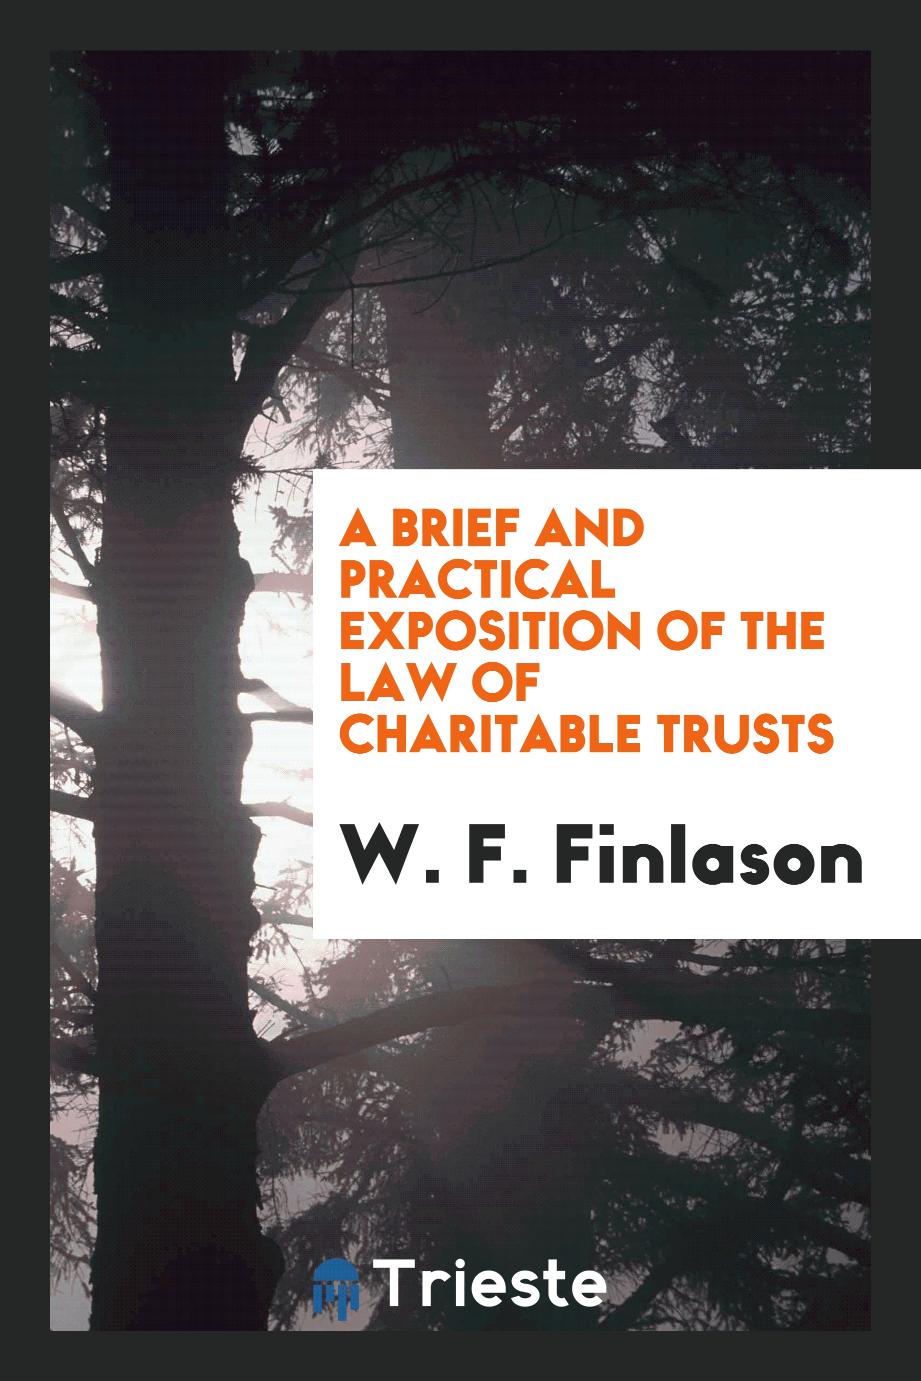 A Brief and Practical Exposition of the Law of Charitable Trusts